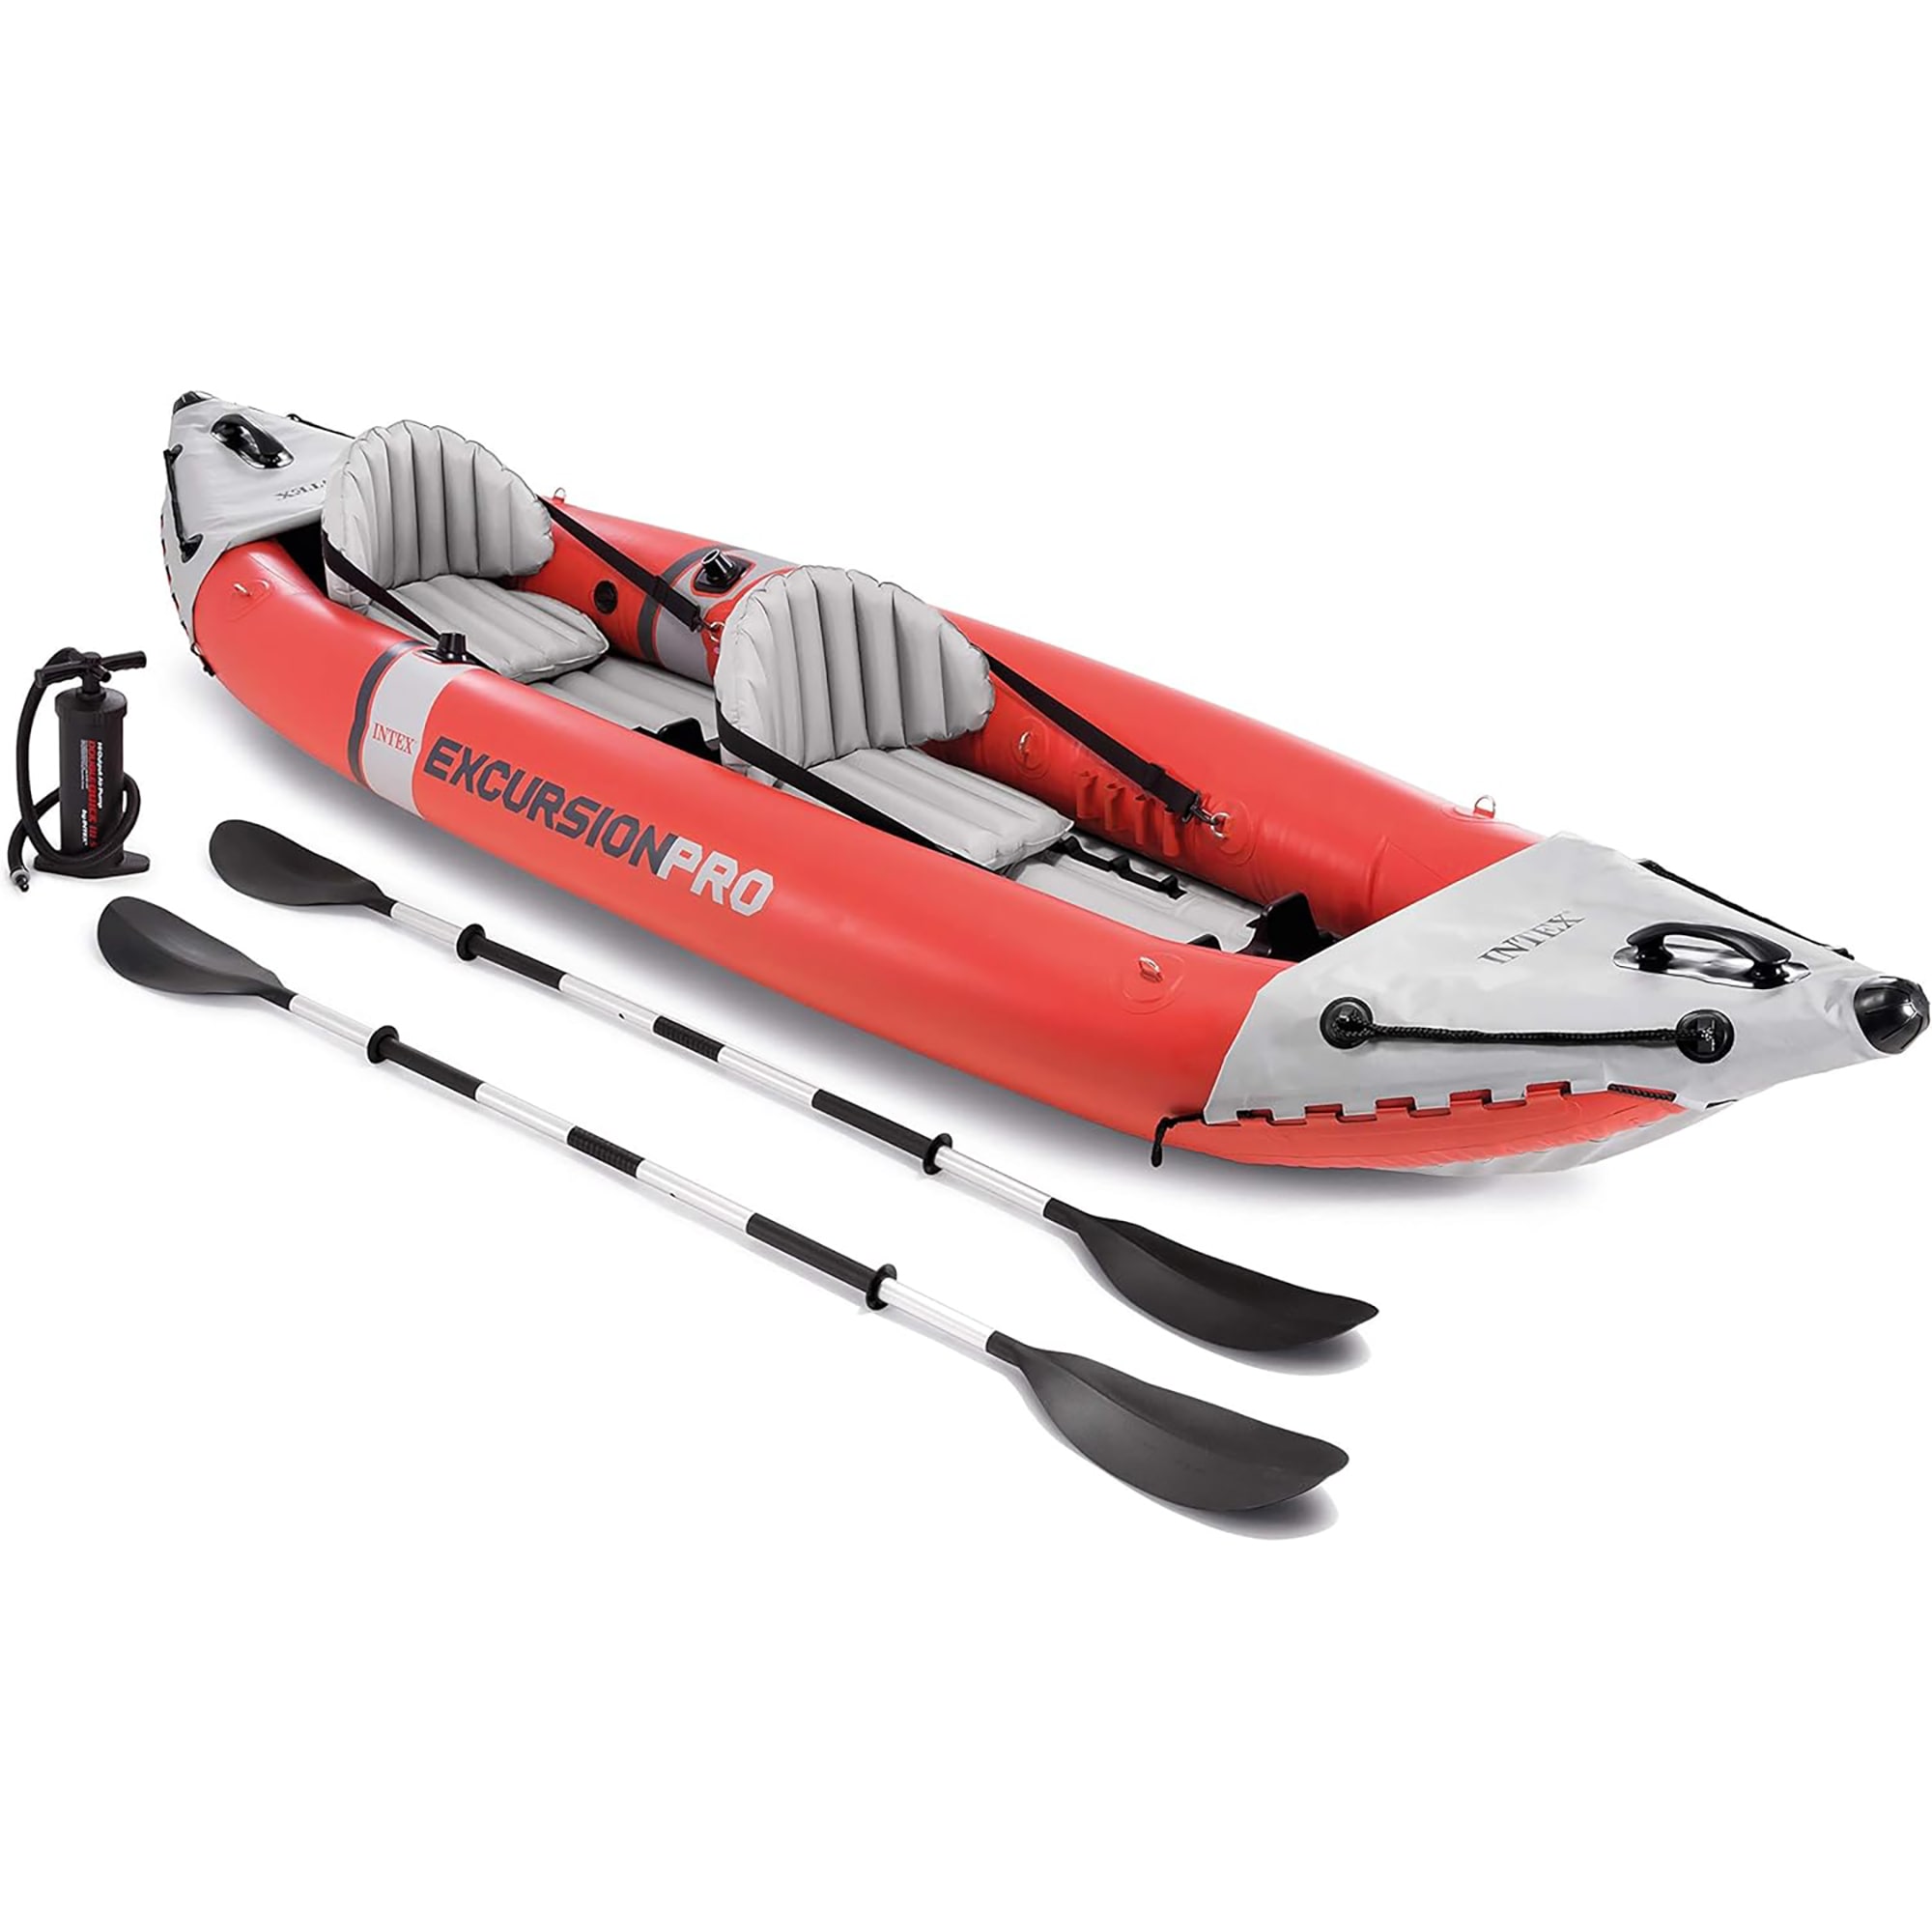 Excursion Pro 151 x 37 x 18" K2 Inflatable Kayak W/ Aluminum Oars, Pump, Fishing Rod Holders, Carry Bag - image 1 of 13